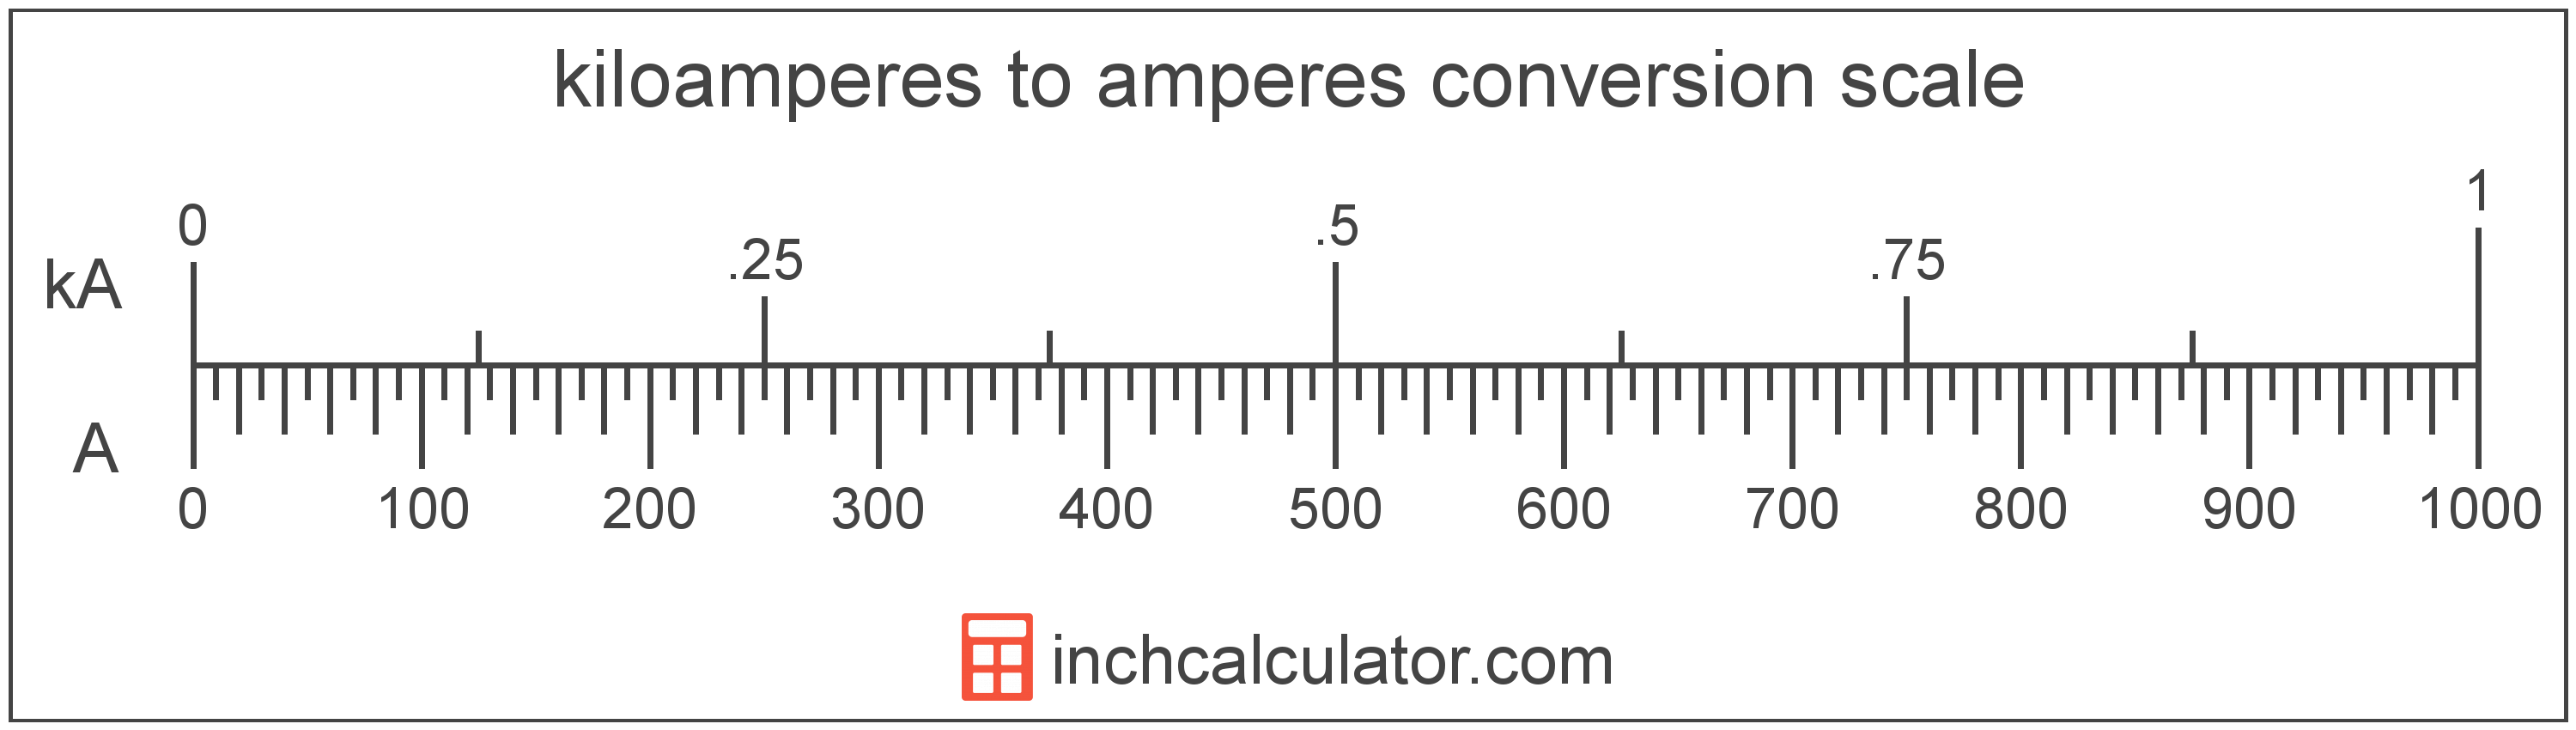 conversion scale showing amperes and equivalent kiloamperes electric current values